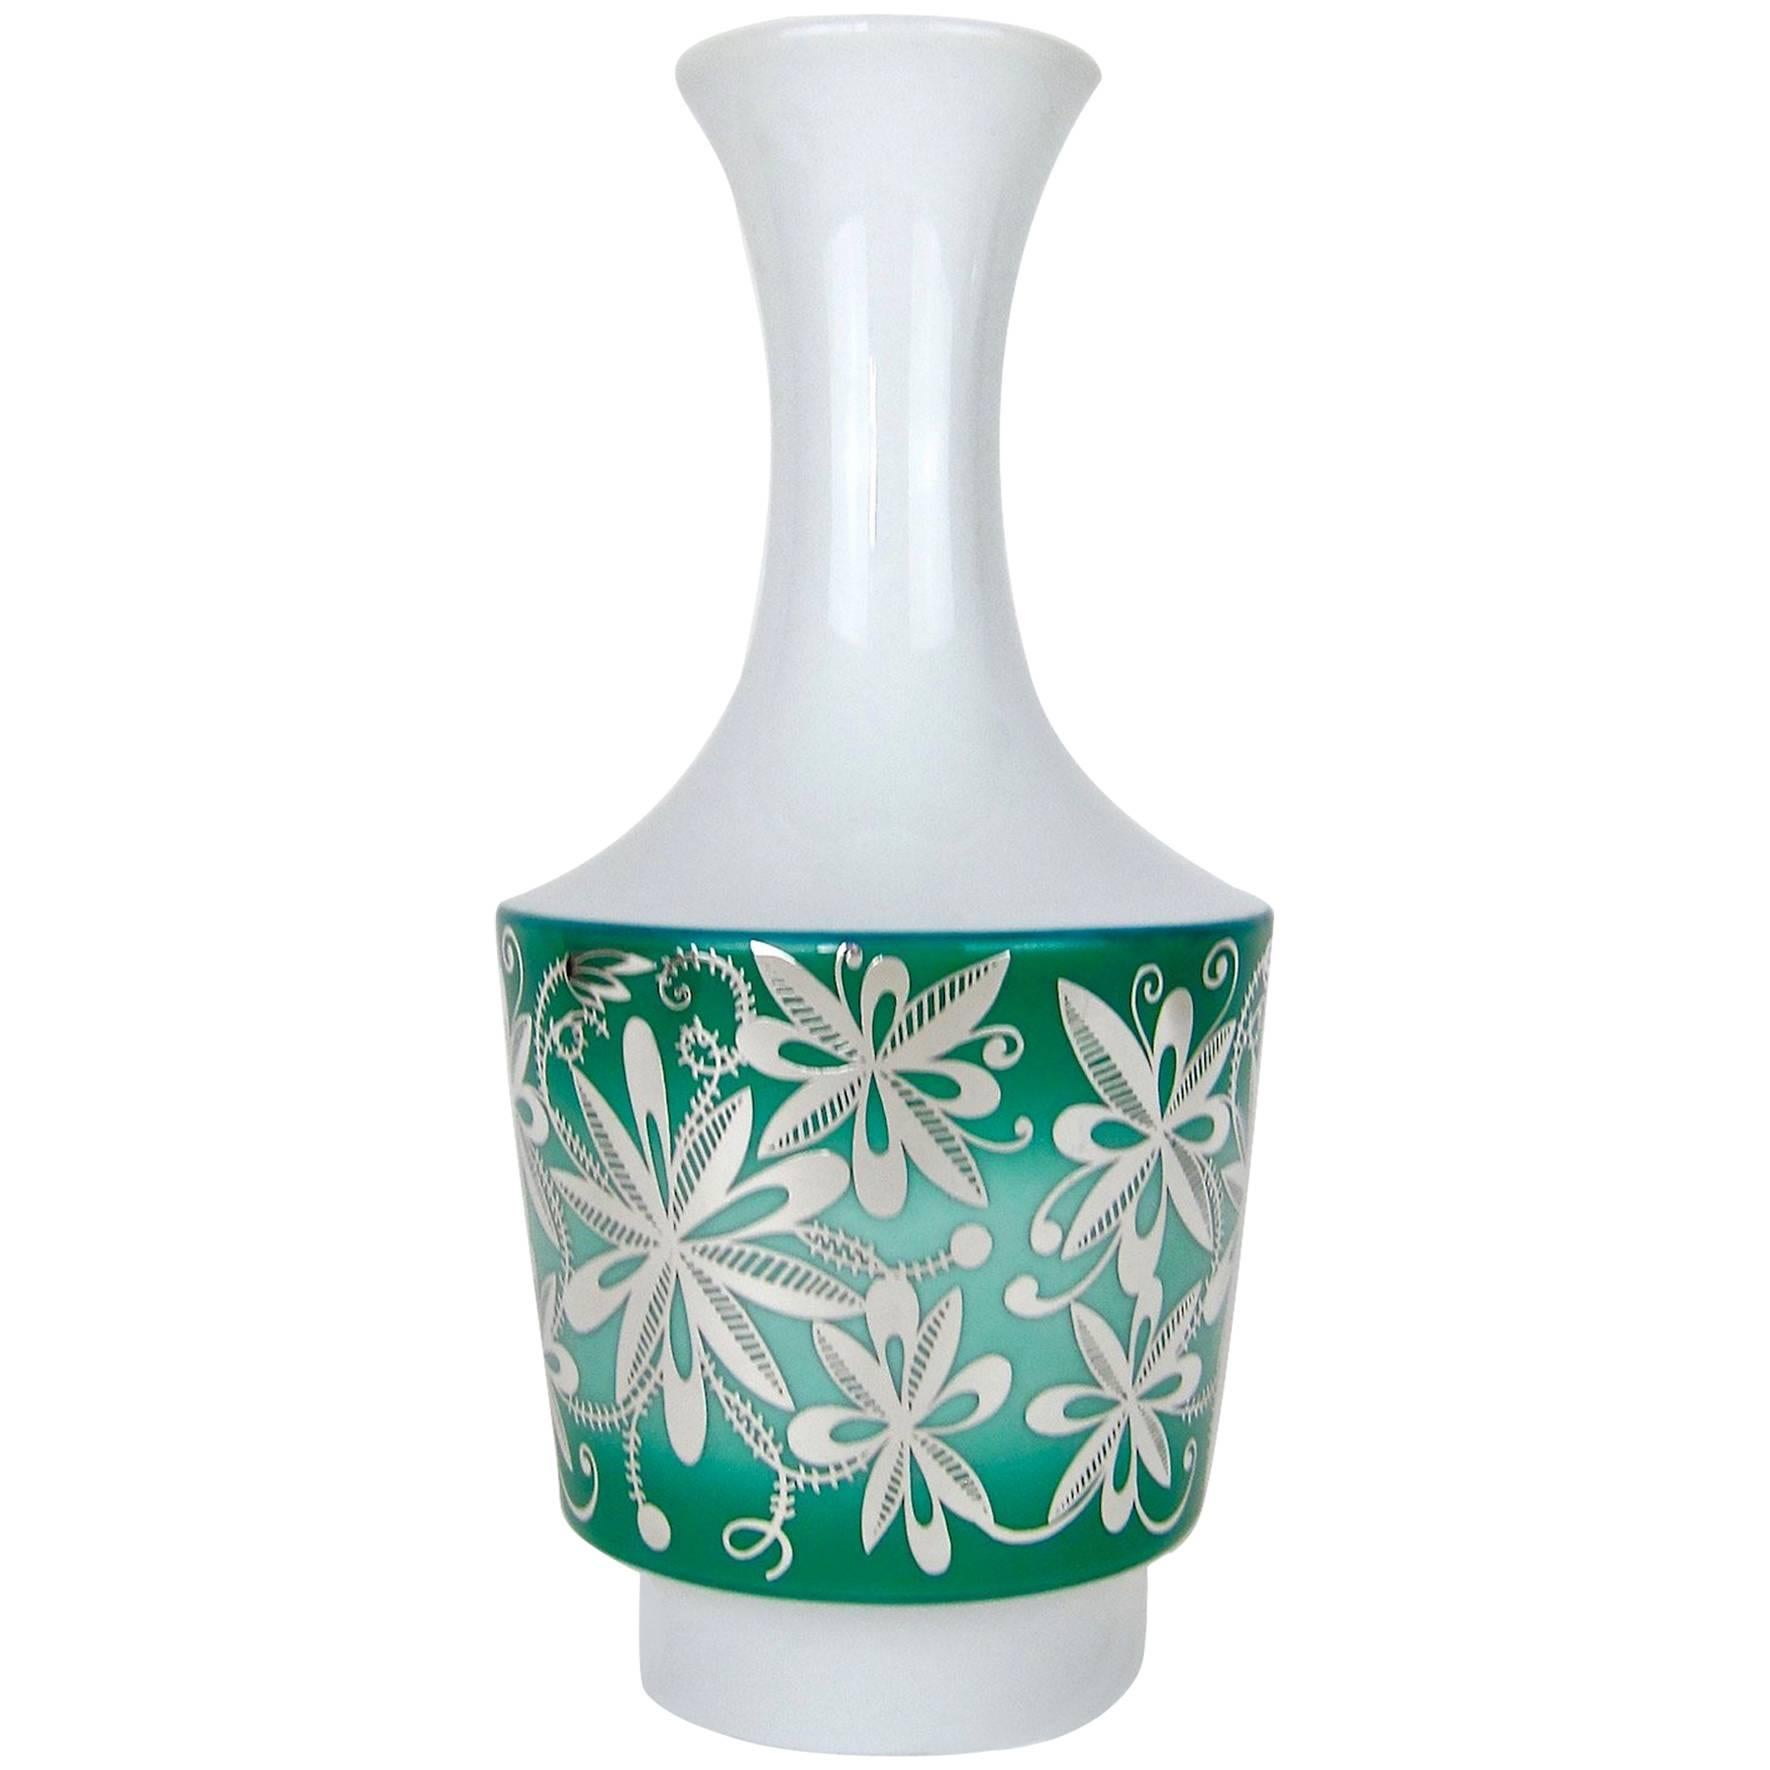 Silver Overlay Spahr & Co Porcelain Vase in Green and White